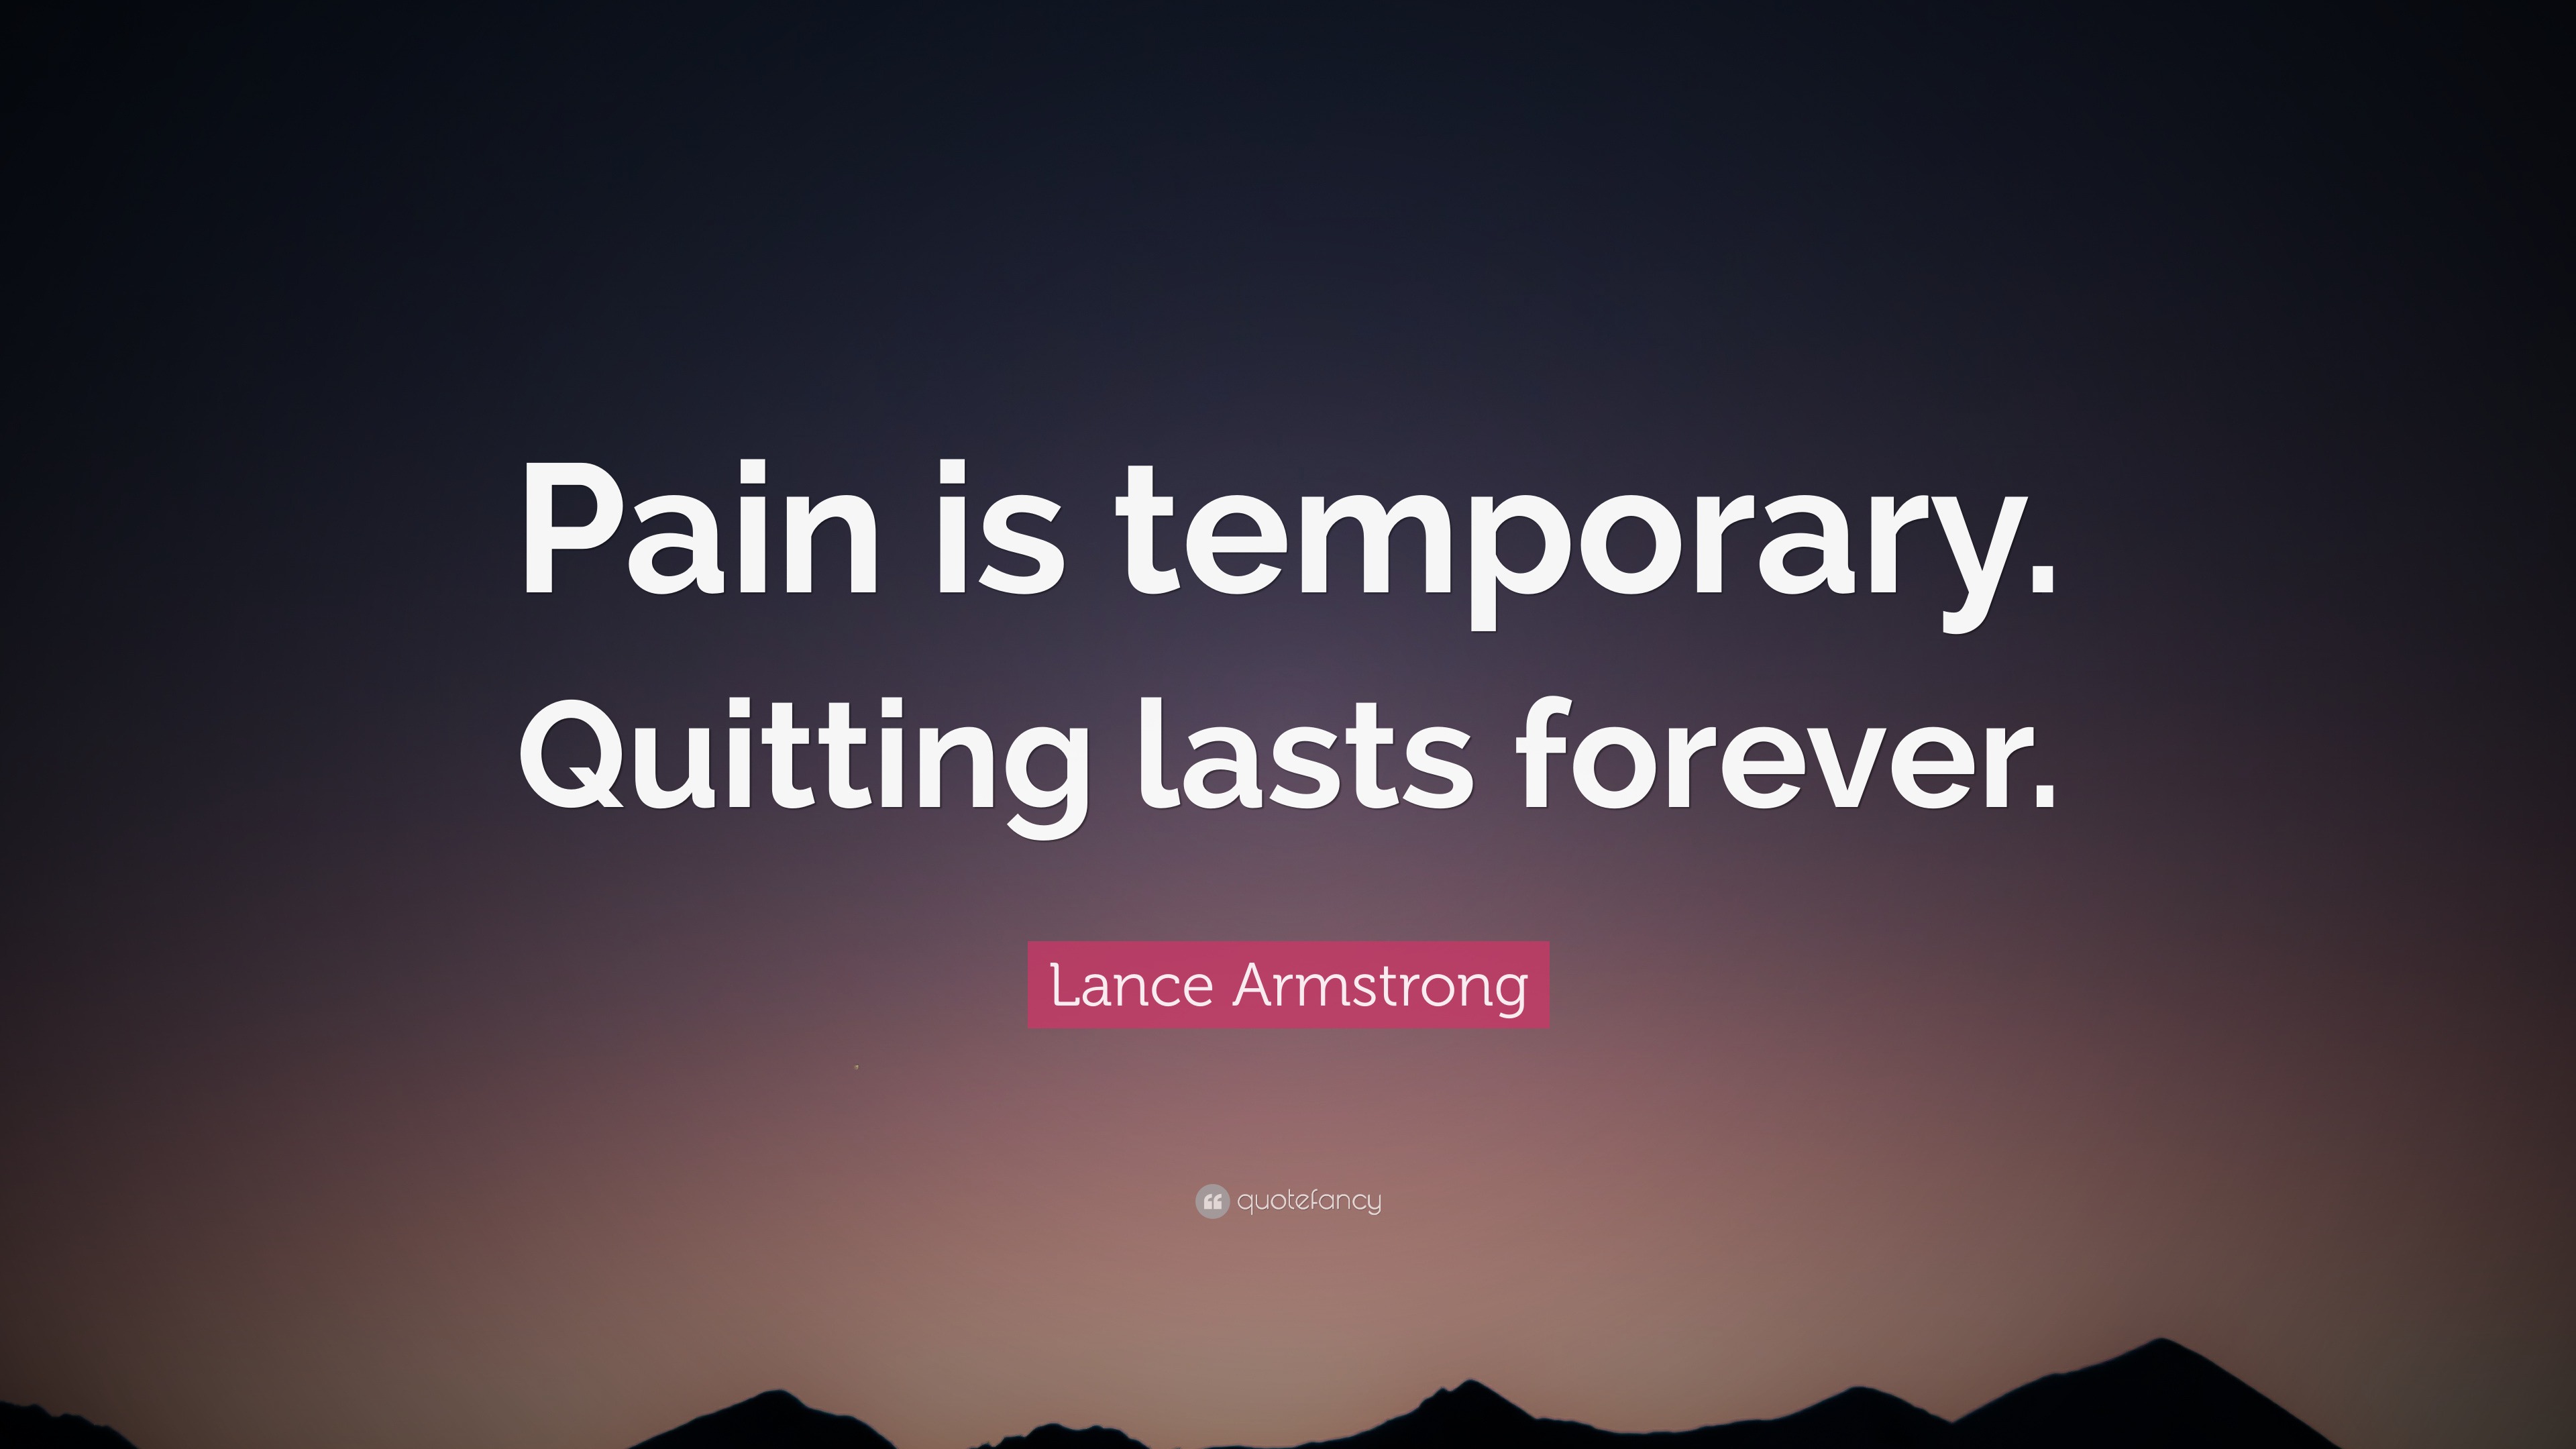 Lance Armstrong Quote: “Pain is temporary. Quitting lasts forever.” (26